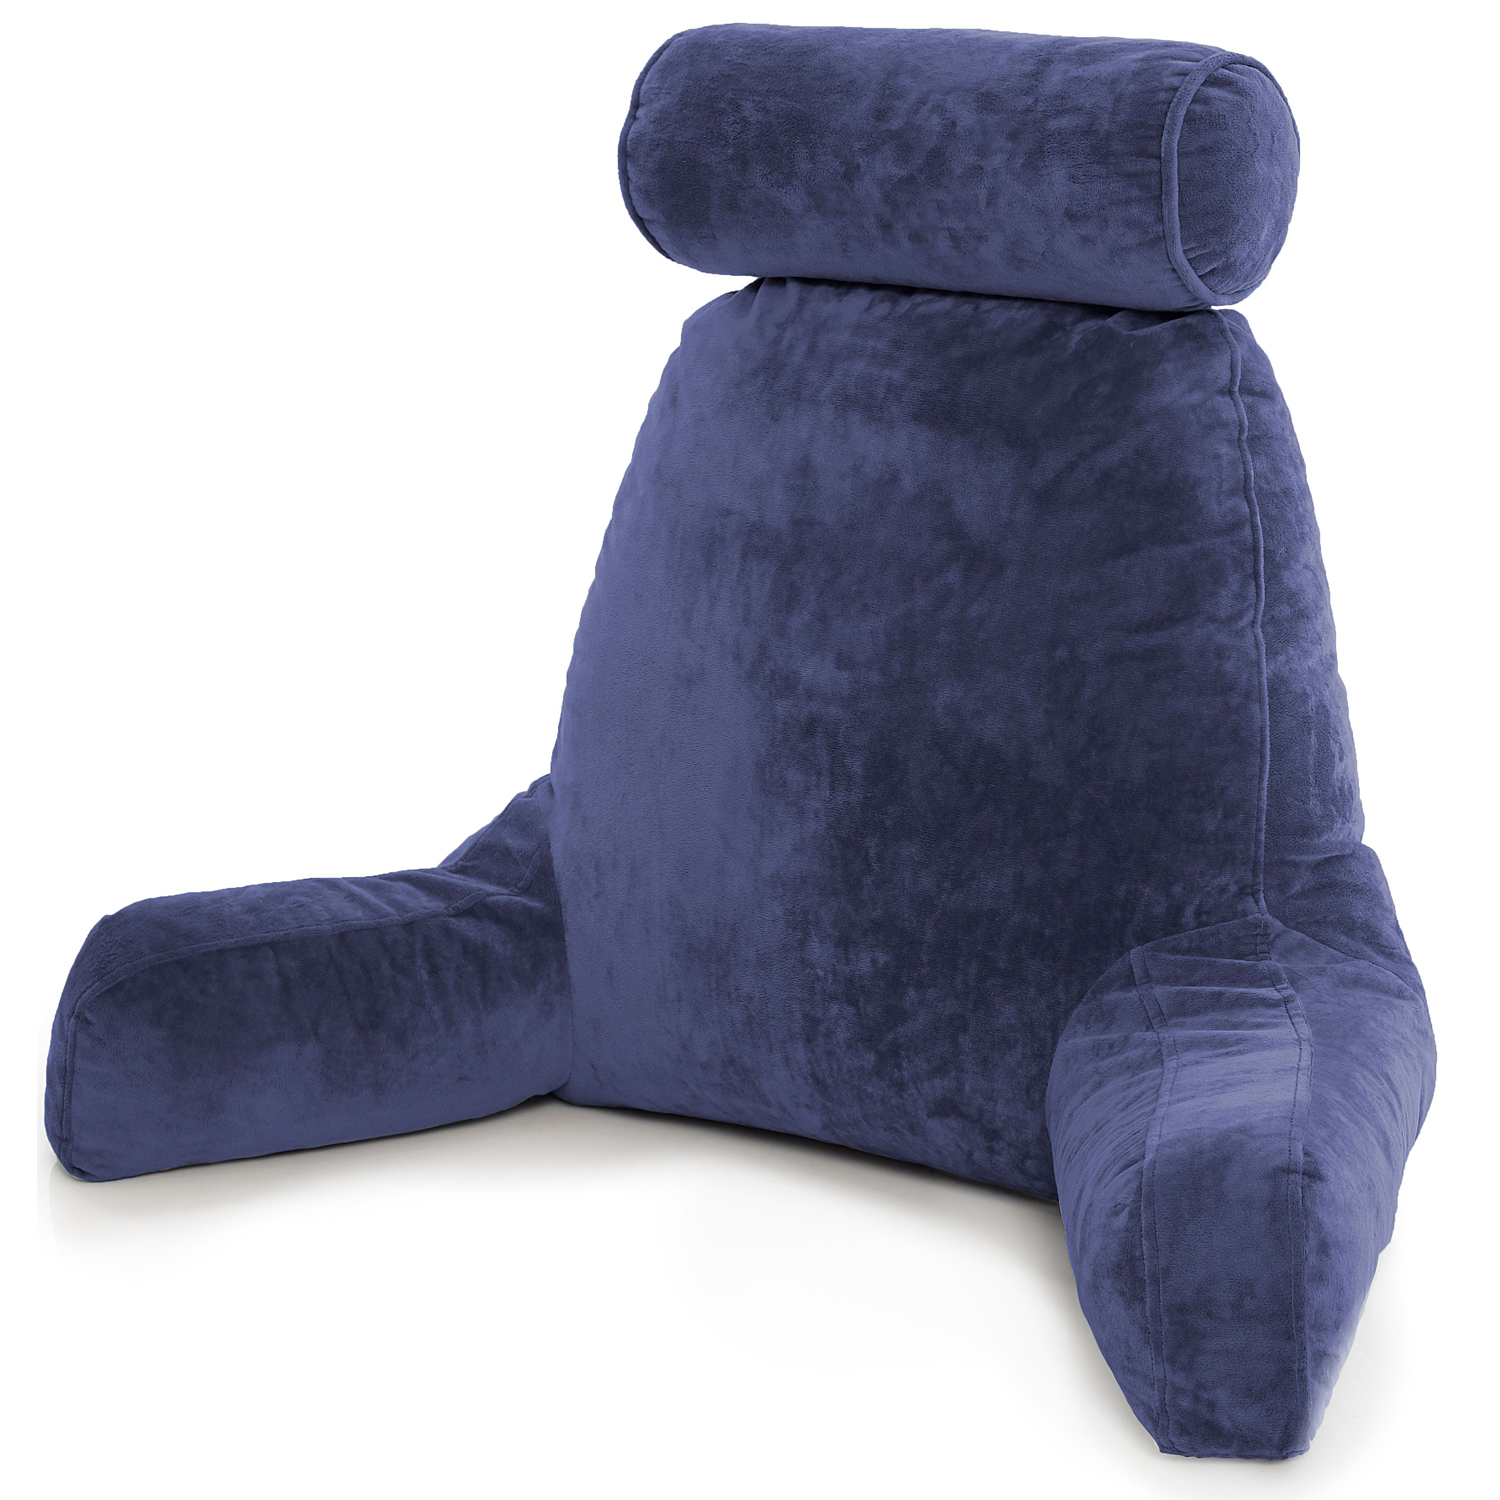 Reading-Bed-Rest-Pillow-with-Arms-Memory-Foam-Detachable-Neck-Roll-Removable-Plush-Covers--Zipper-Sh-1806609-4